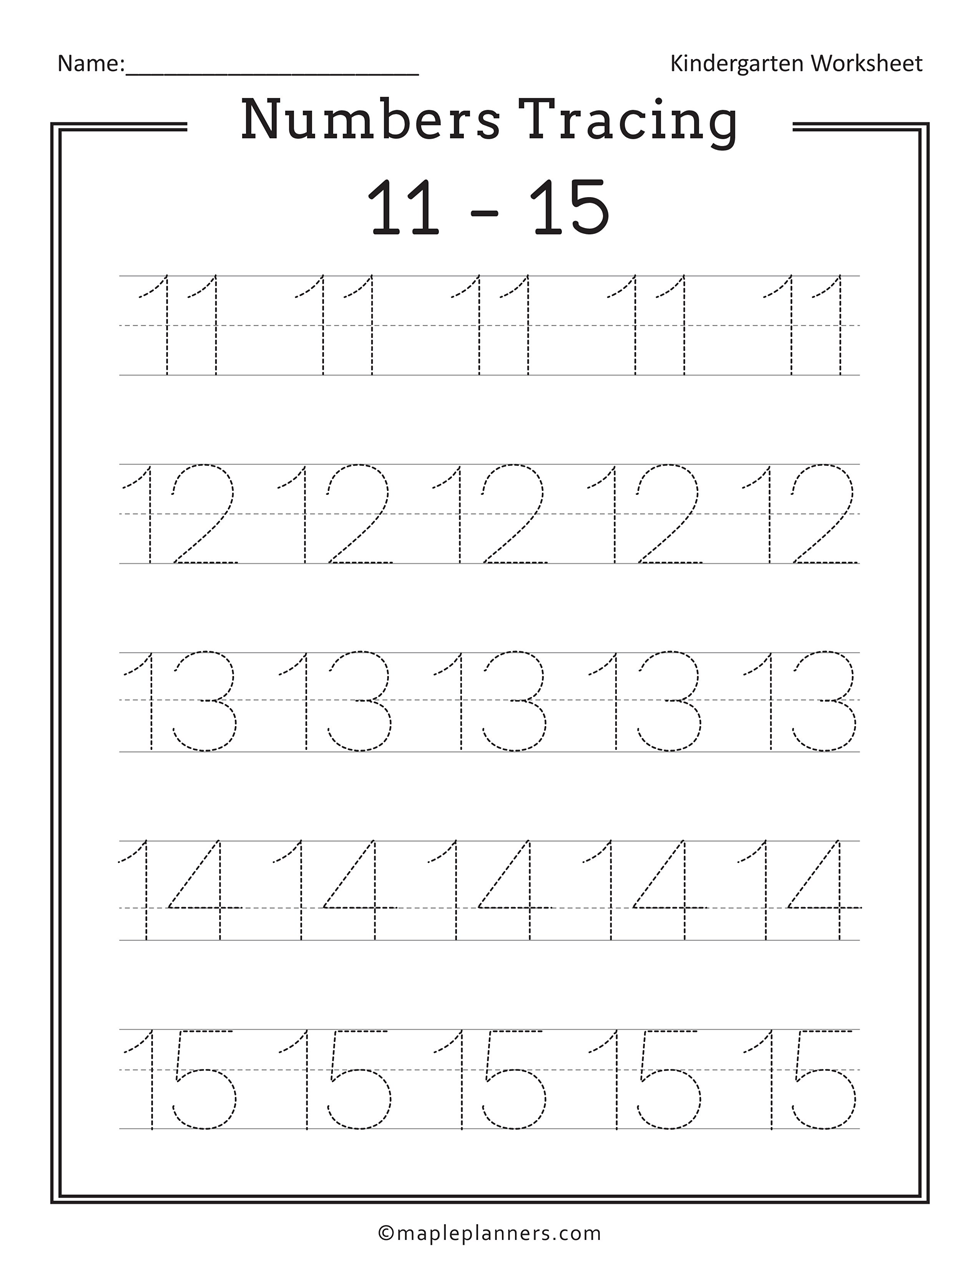 Free Printable Worksheets For Writing Numbers 1 20 Printable Form Templates And Letter